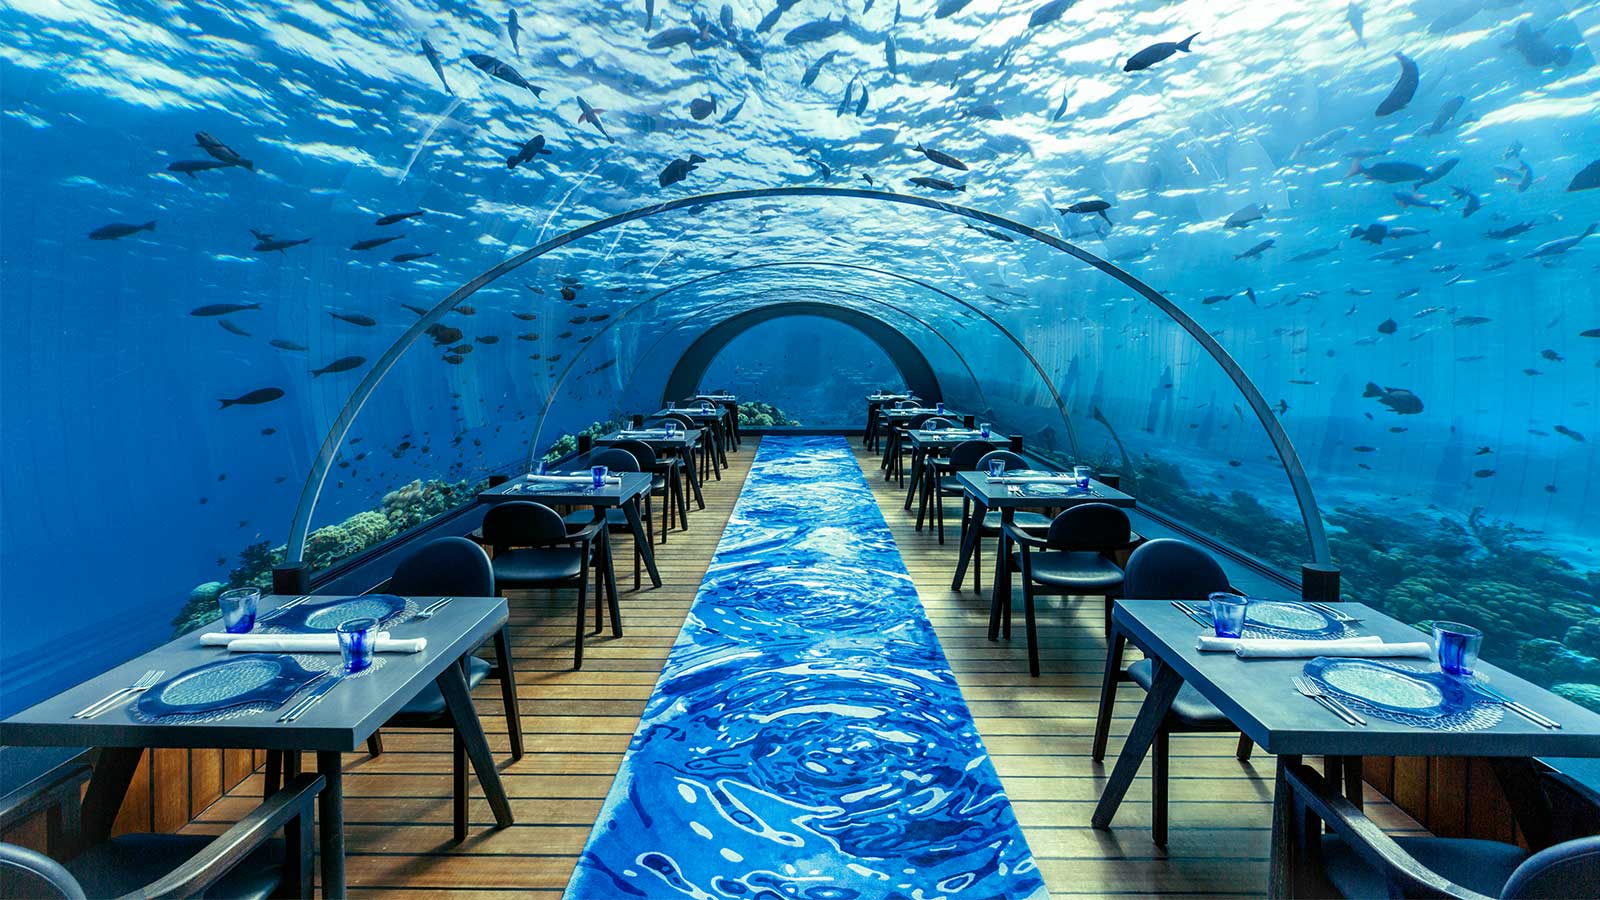 The largest undersea restaurant with beautiful blue waters of the Maldives